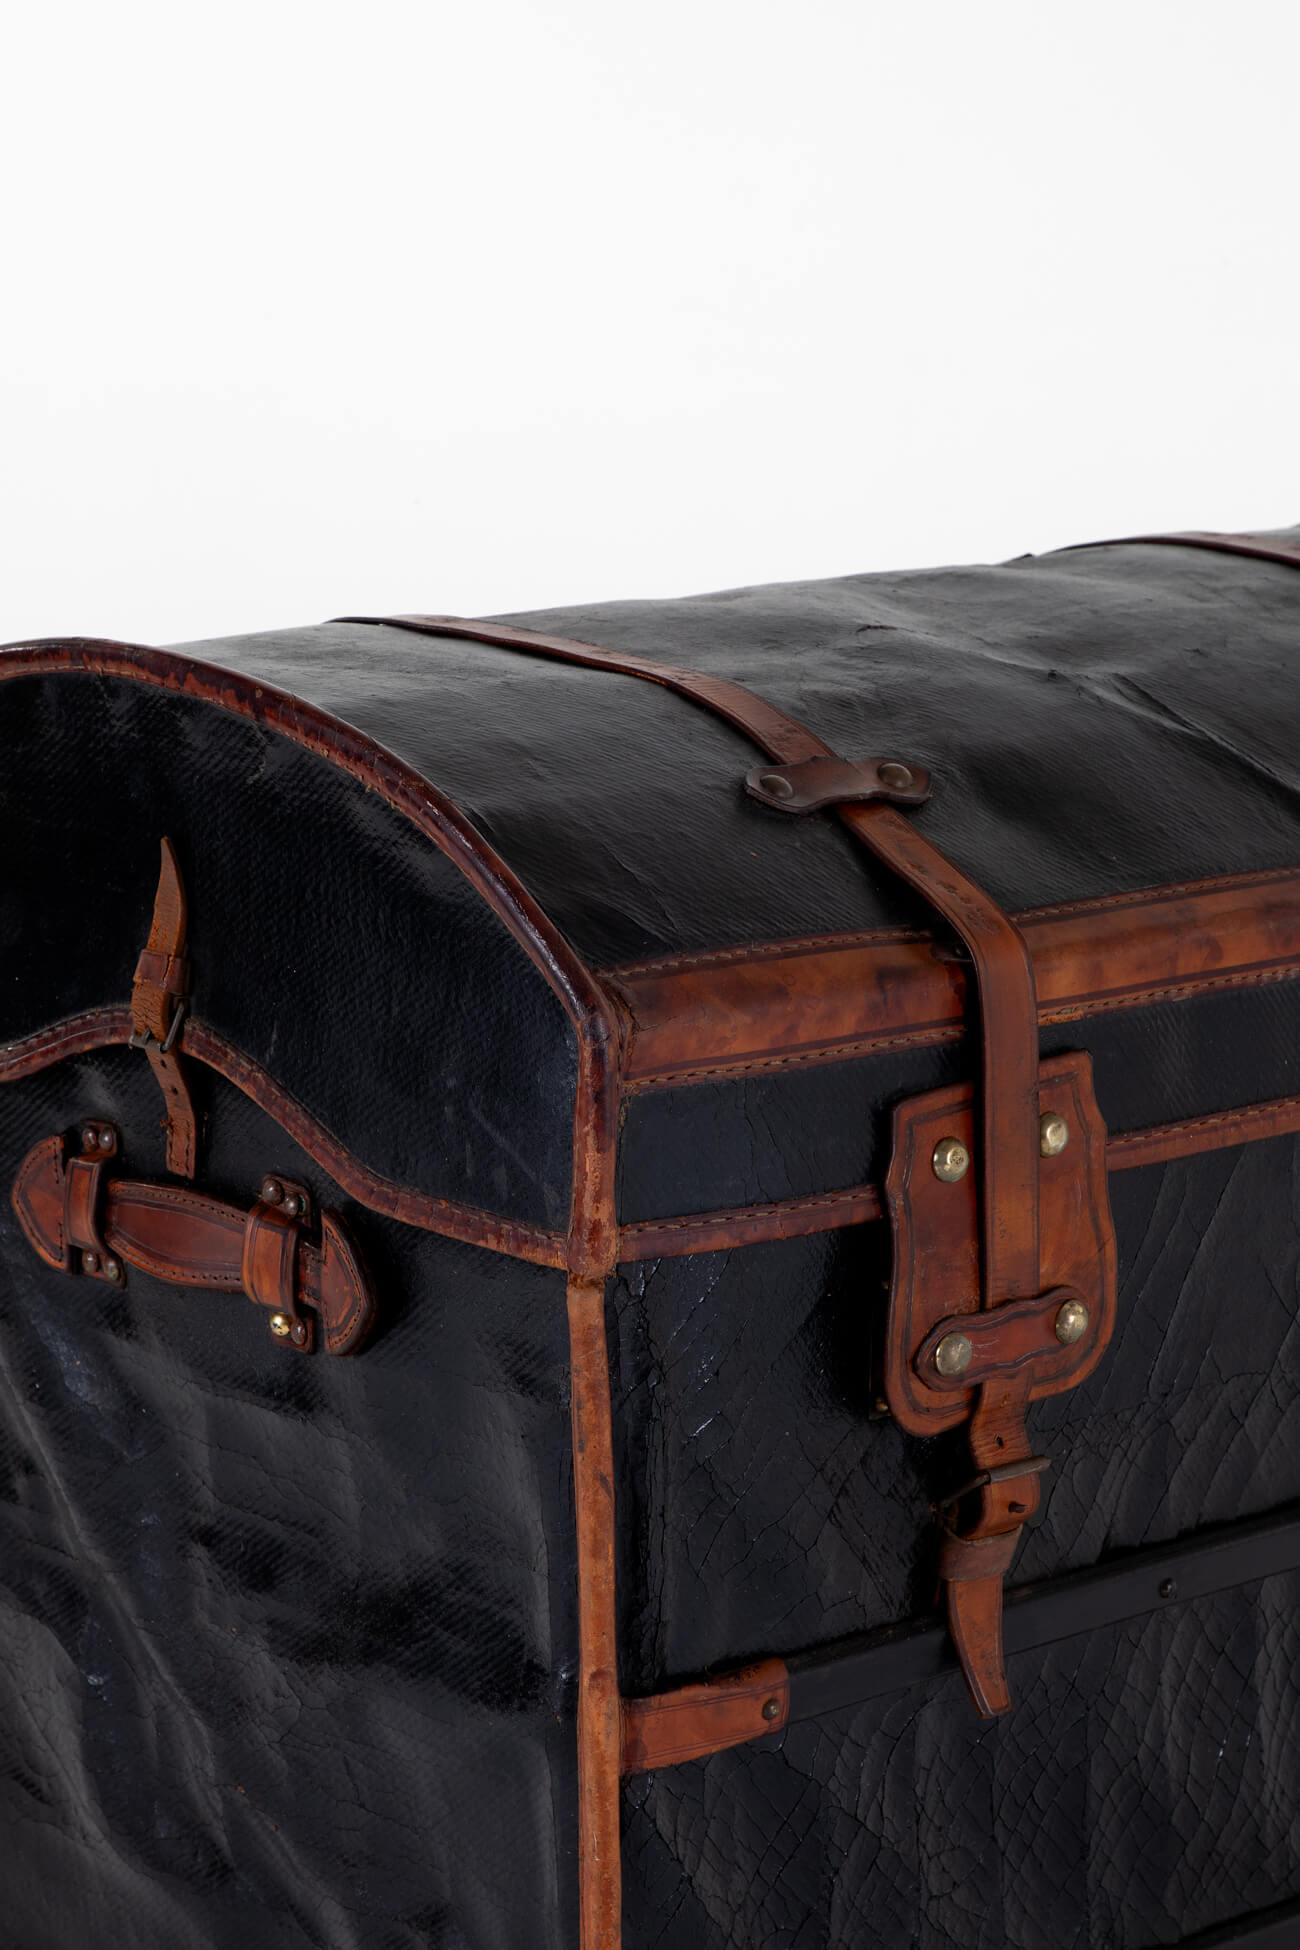 A wonderful late 19th-century leather steamer trunk.

The trunk is made of canvas and has been leather-mounted around a wicker dome top. Two large buckles to the front of the trunk secure the lid coupled with a small buckle to either end. To the